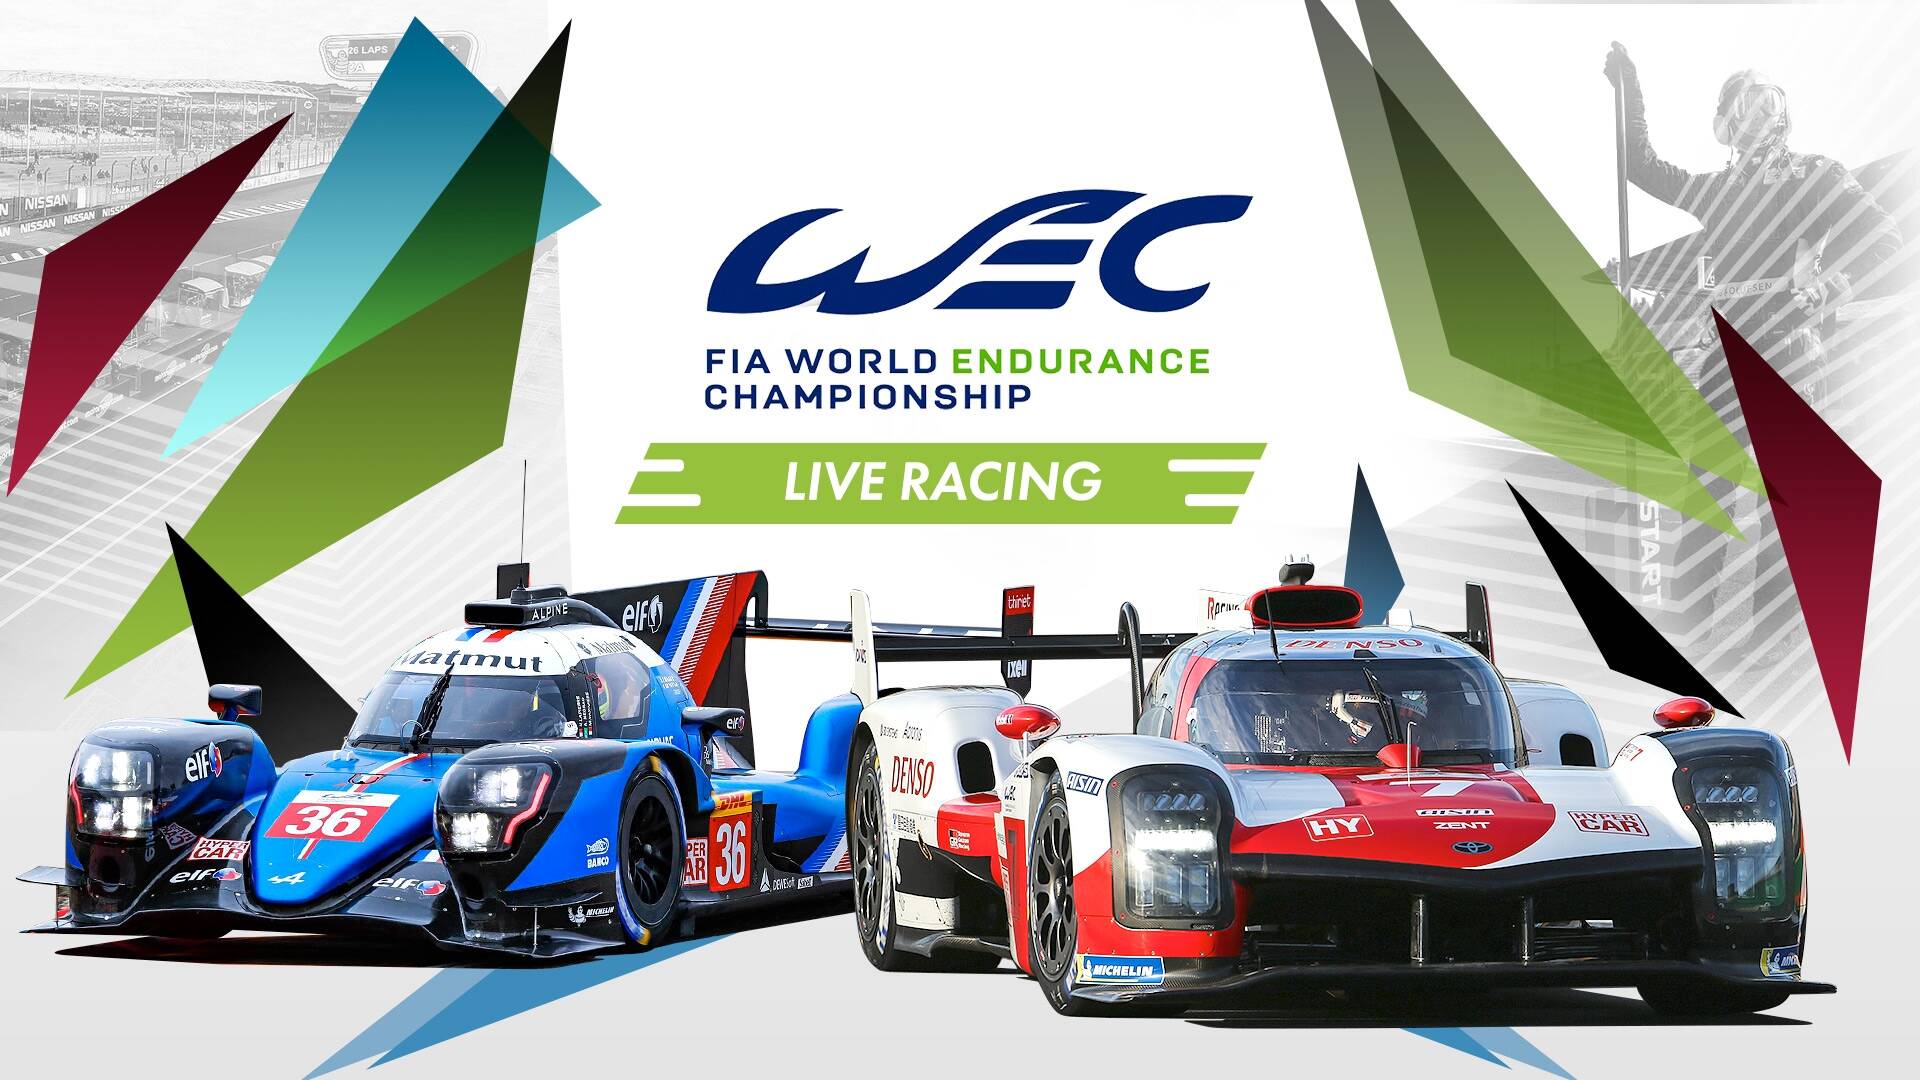 HEART OF RACING TO ENTER THE FIA WORLD ENDURANCE CHAMPIONSHIP